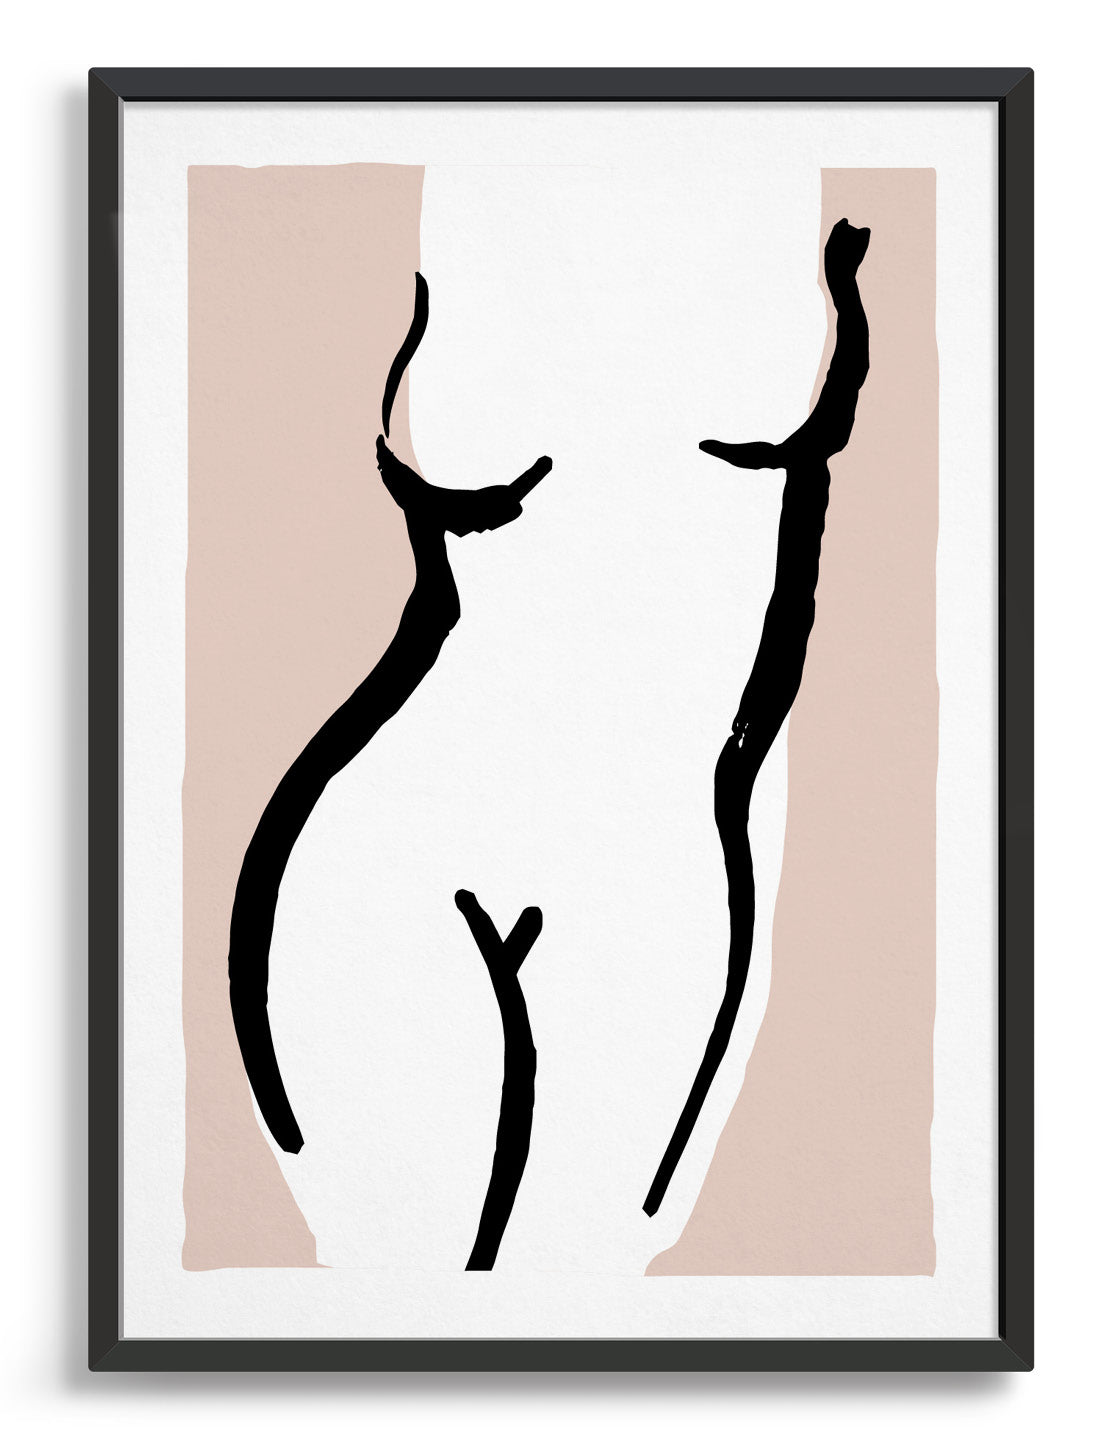 simple minimal black line drawing of a woman's torso against a pink background